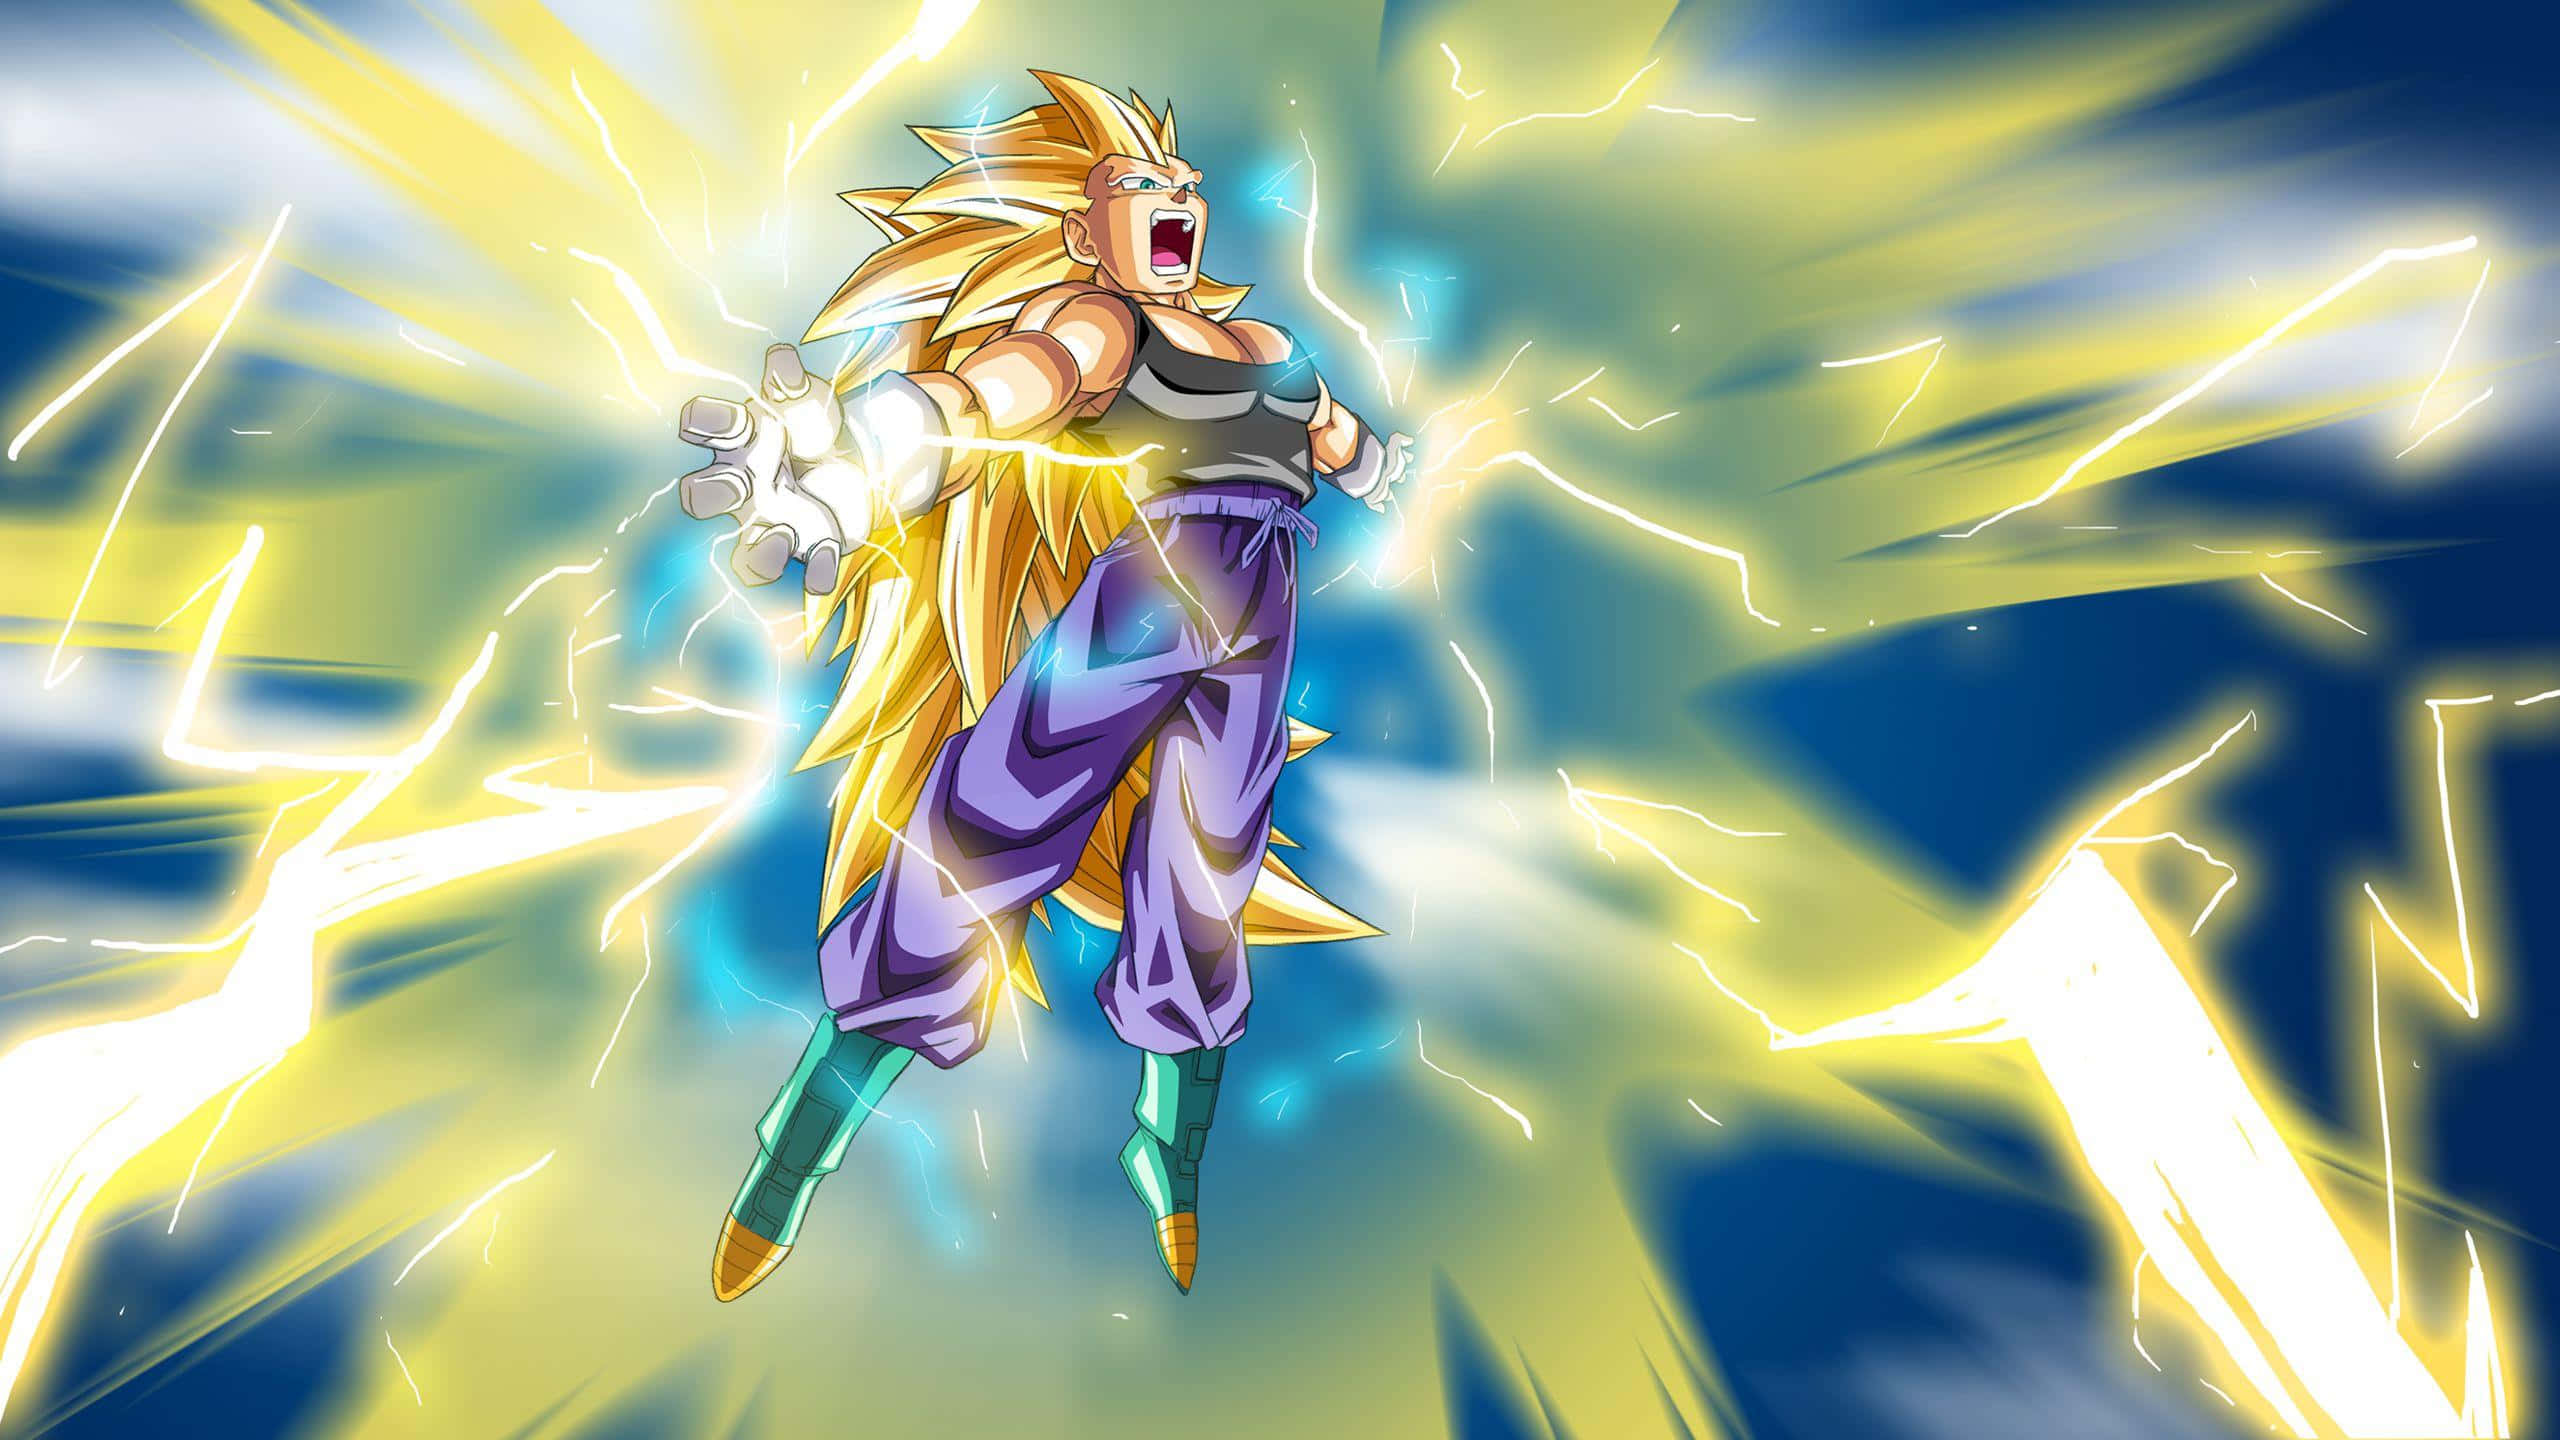 Vegeta unleashes his ultimte attack against Cell. Wallpaper